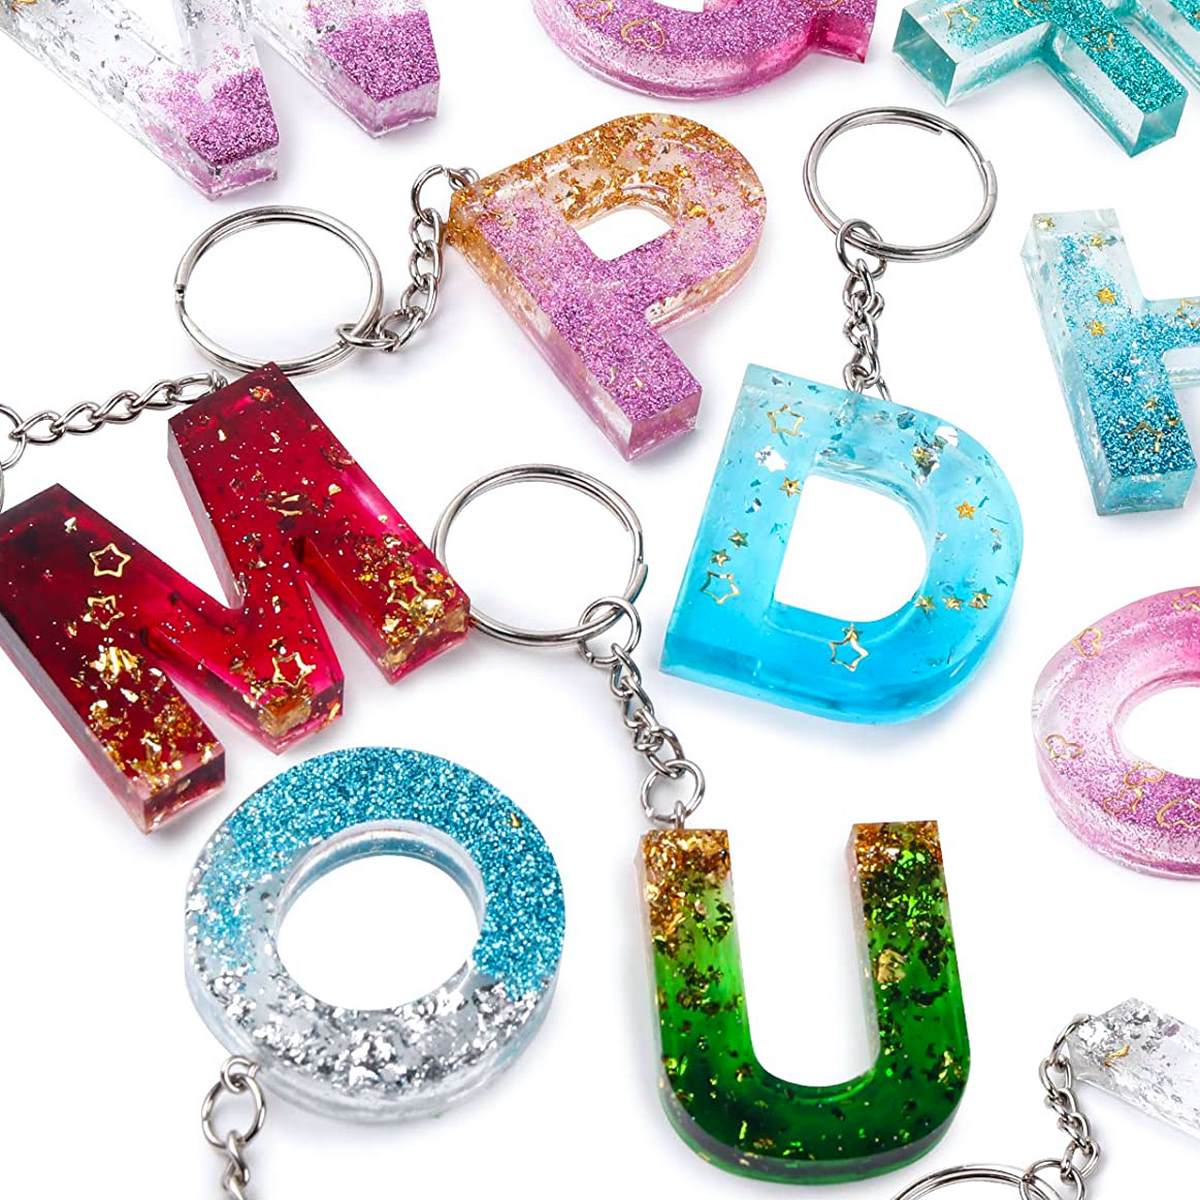 jags-mumbai Alphabet (Quick Drying) ABCD- Alphabet resin mold with keychain ring hole (silicon mold)- Premium Quality